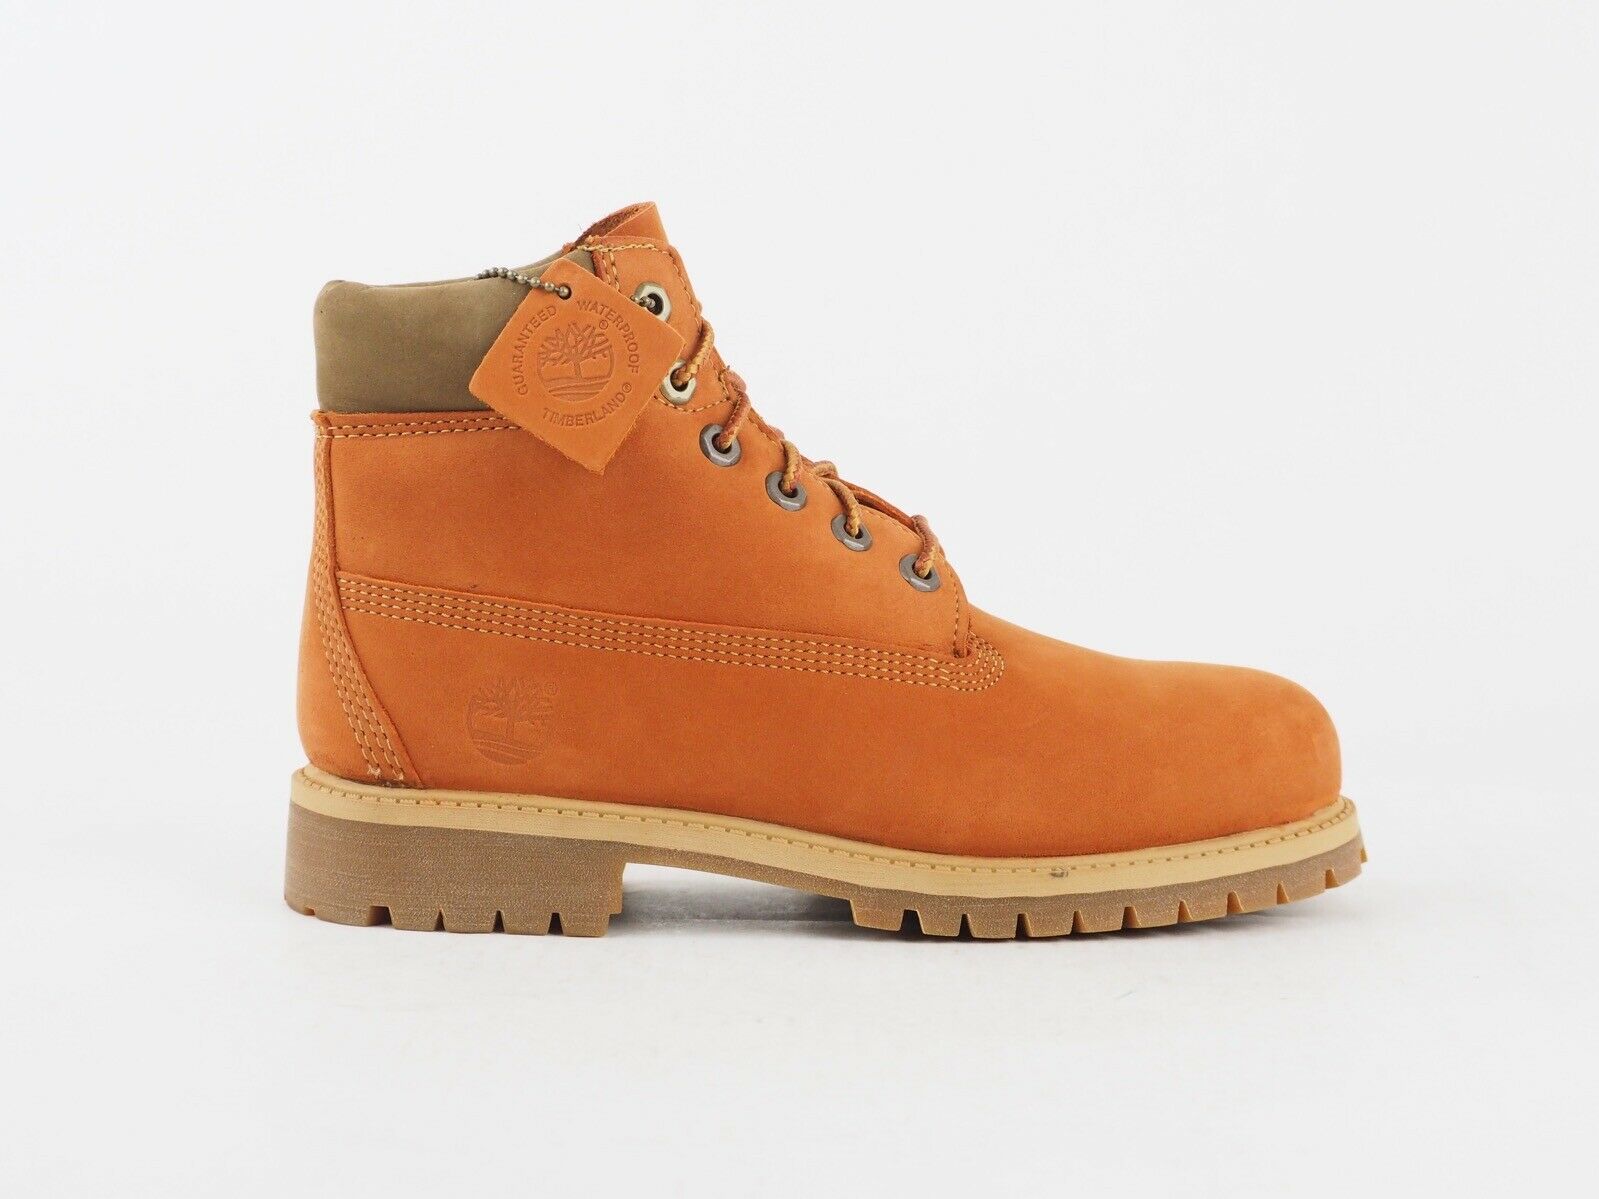 Boys Timberland 6 Inch Premium A1ADC Orange Leather Lace Up Warm Chukka Boots - London Top Style